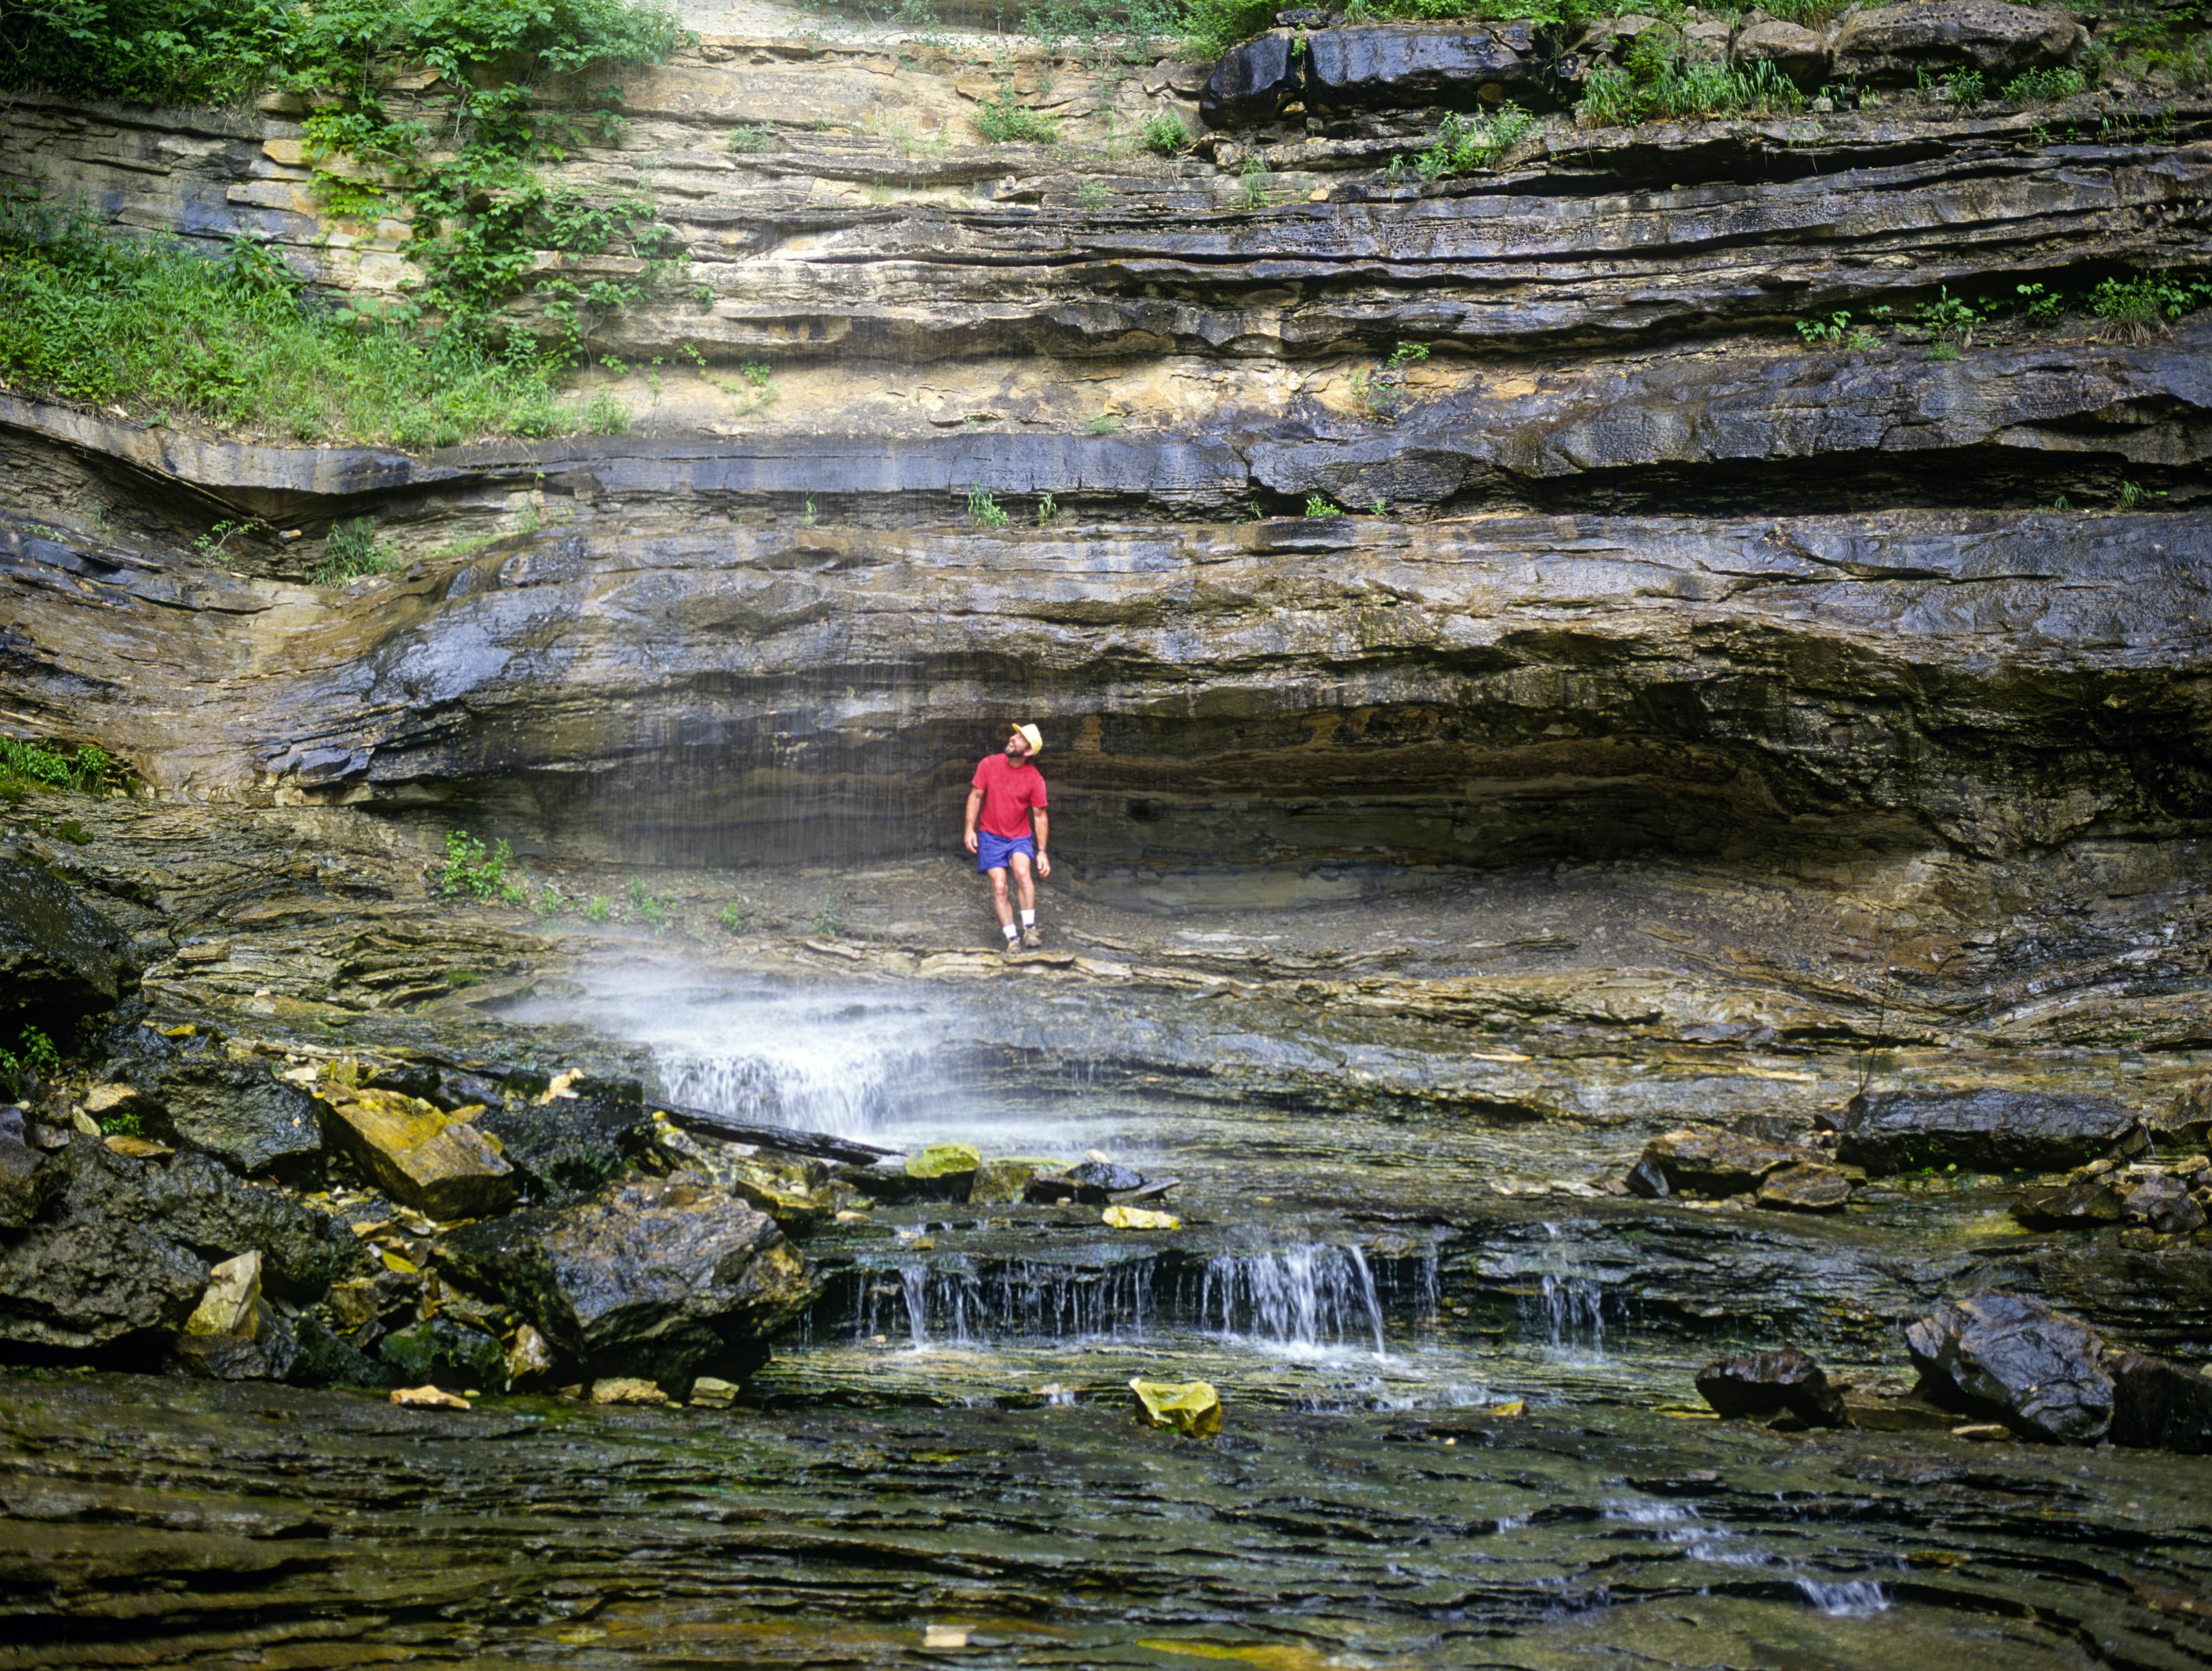 A city within a park: Arkansas' Hot Springs National Park turns 100 -  Roadtrippers